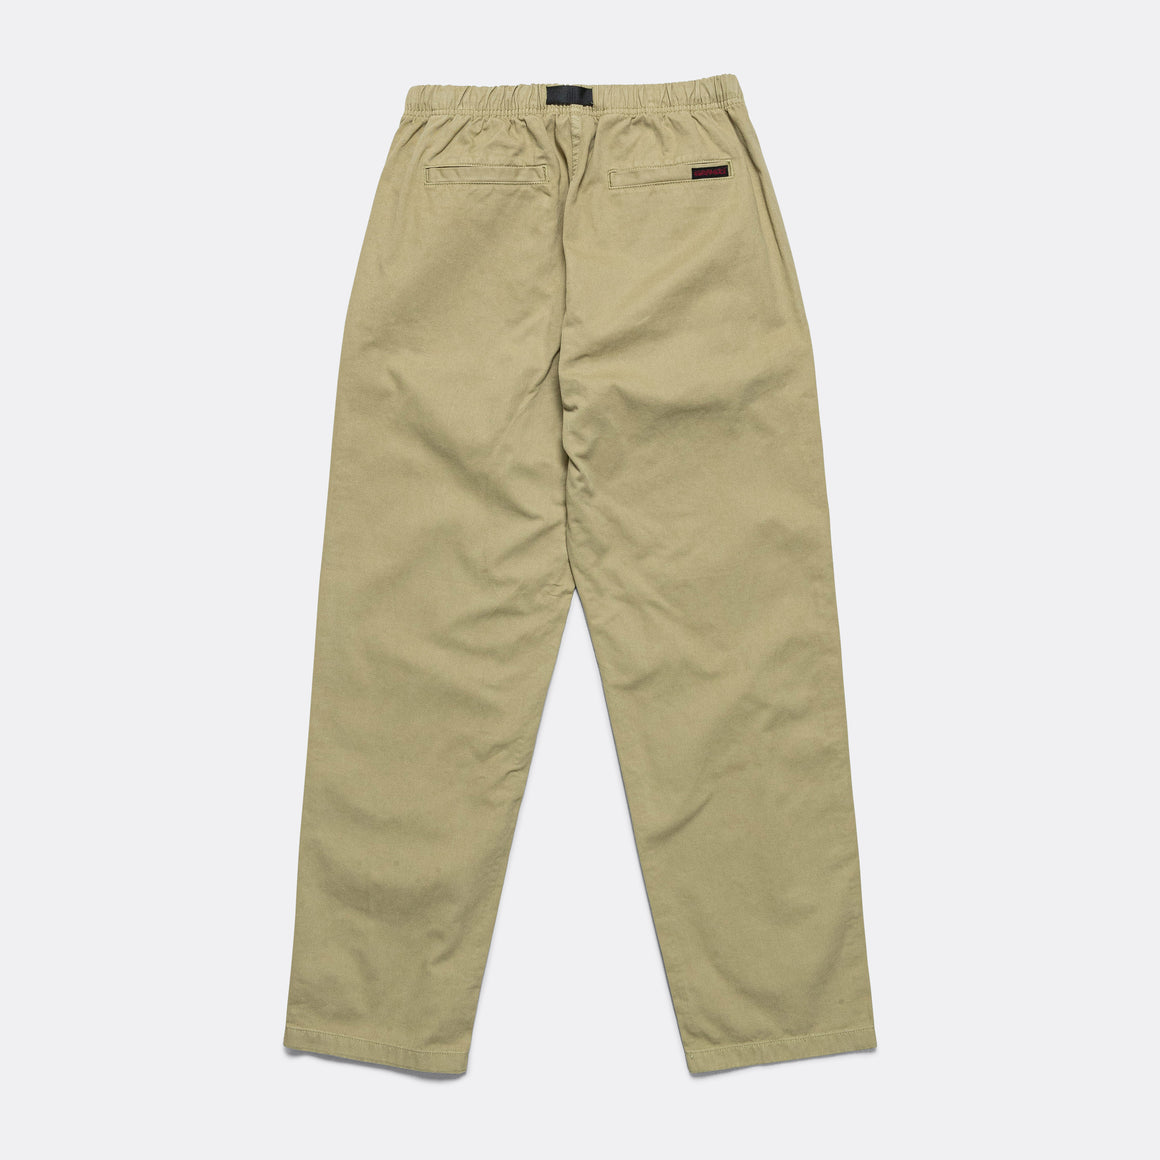 Gramicci - Gramicci Pant - Faded Olive - UP THERE